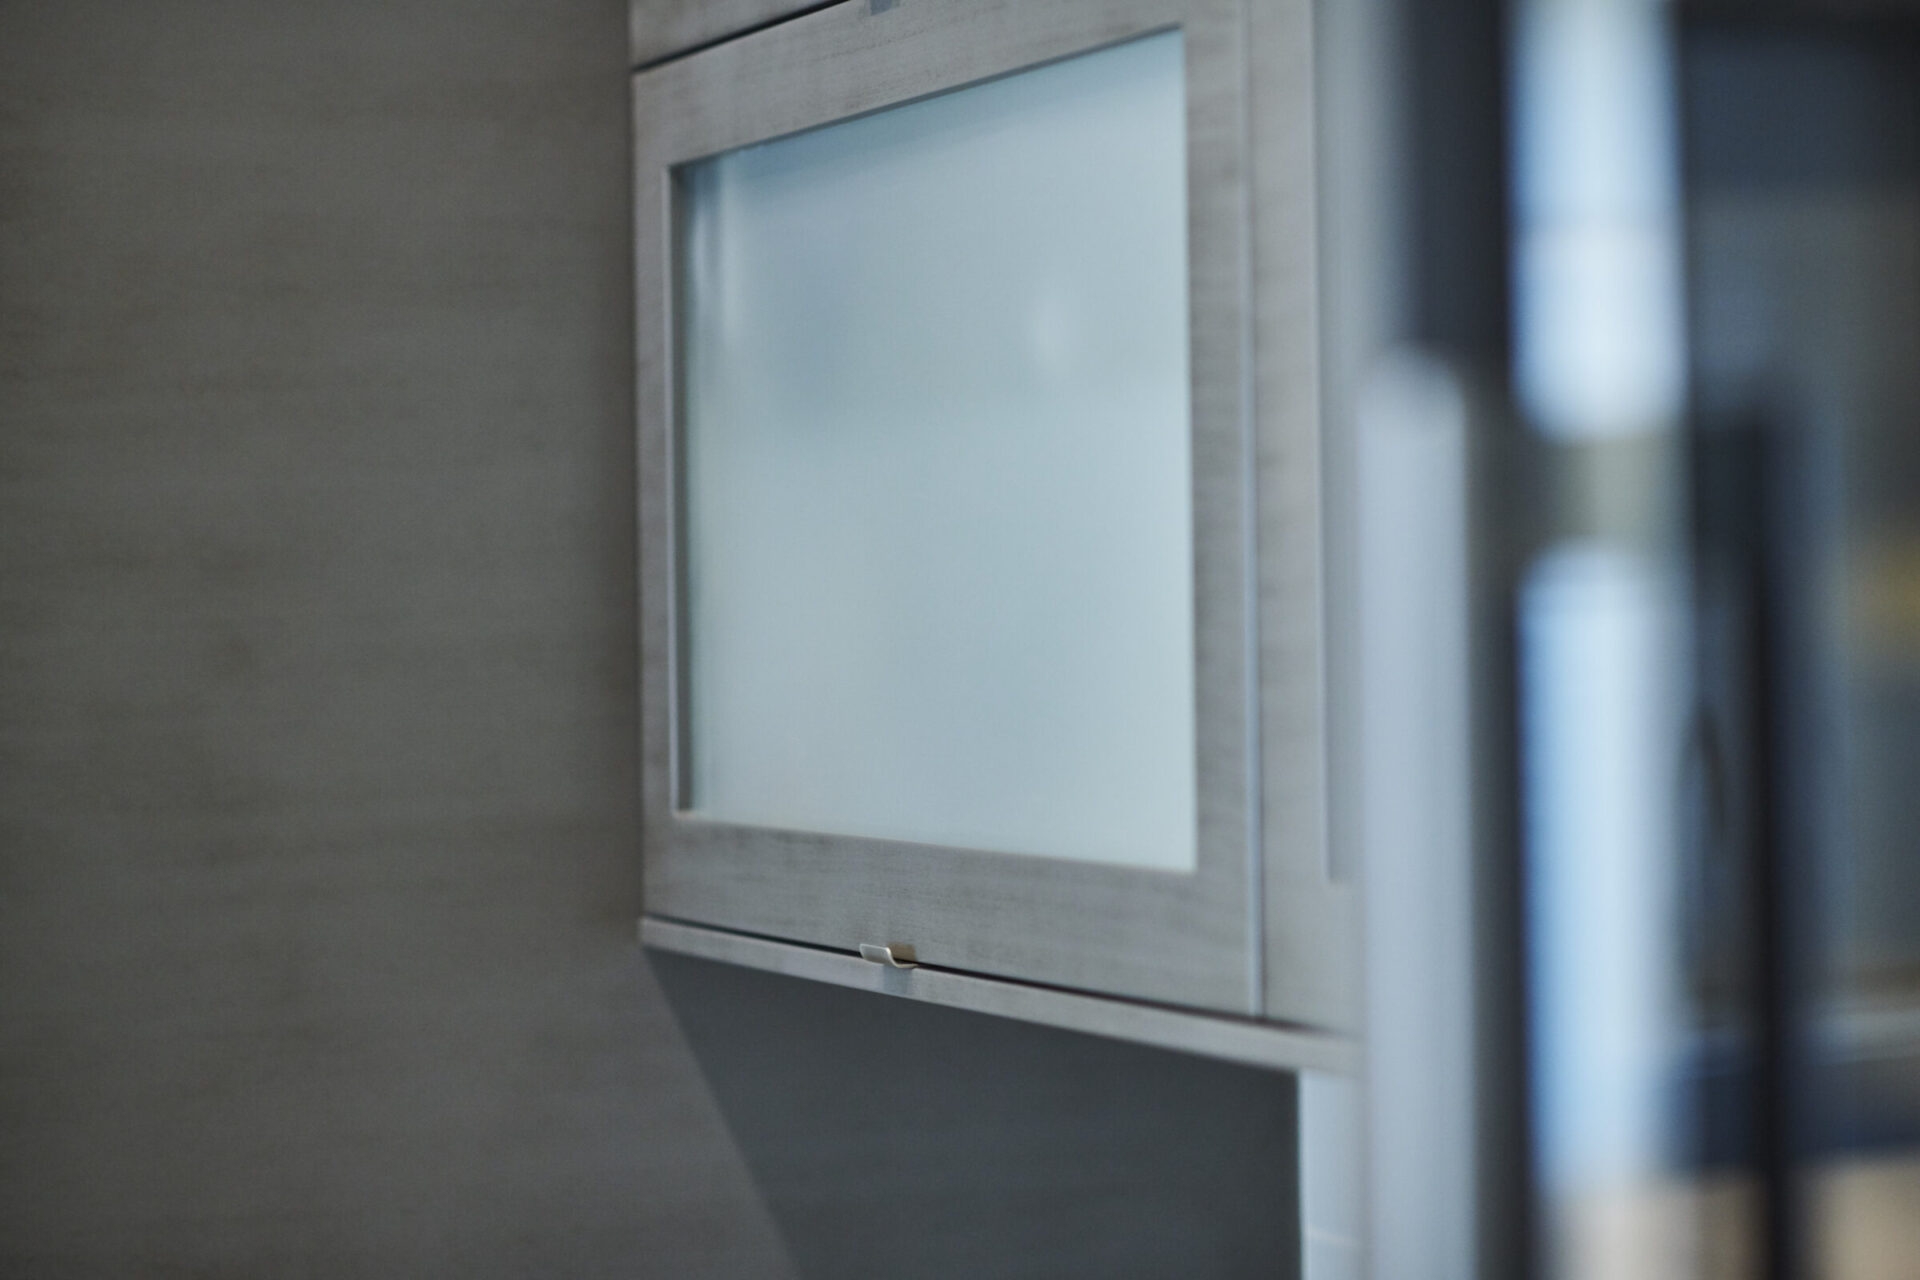 This image features a close-up view of a frosted glass cabinet door with a metal handle, set against a blurred interior background.